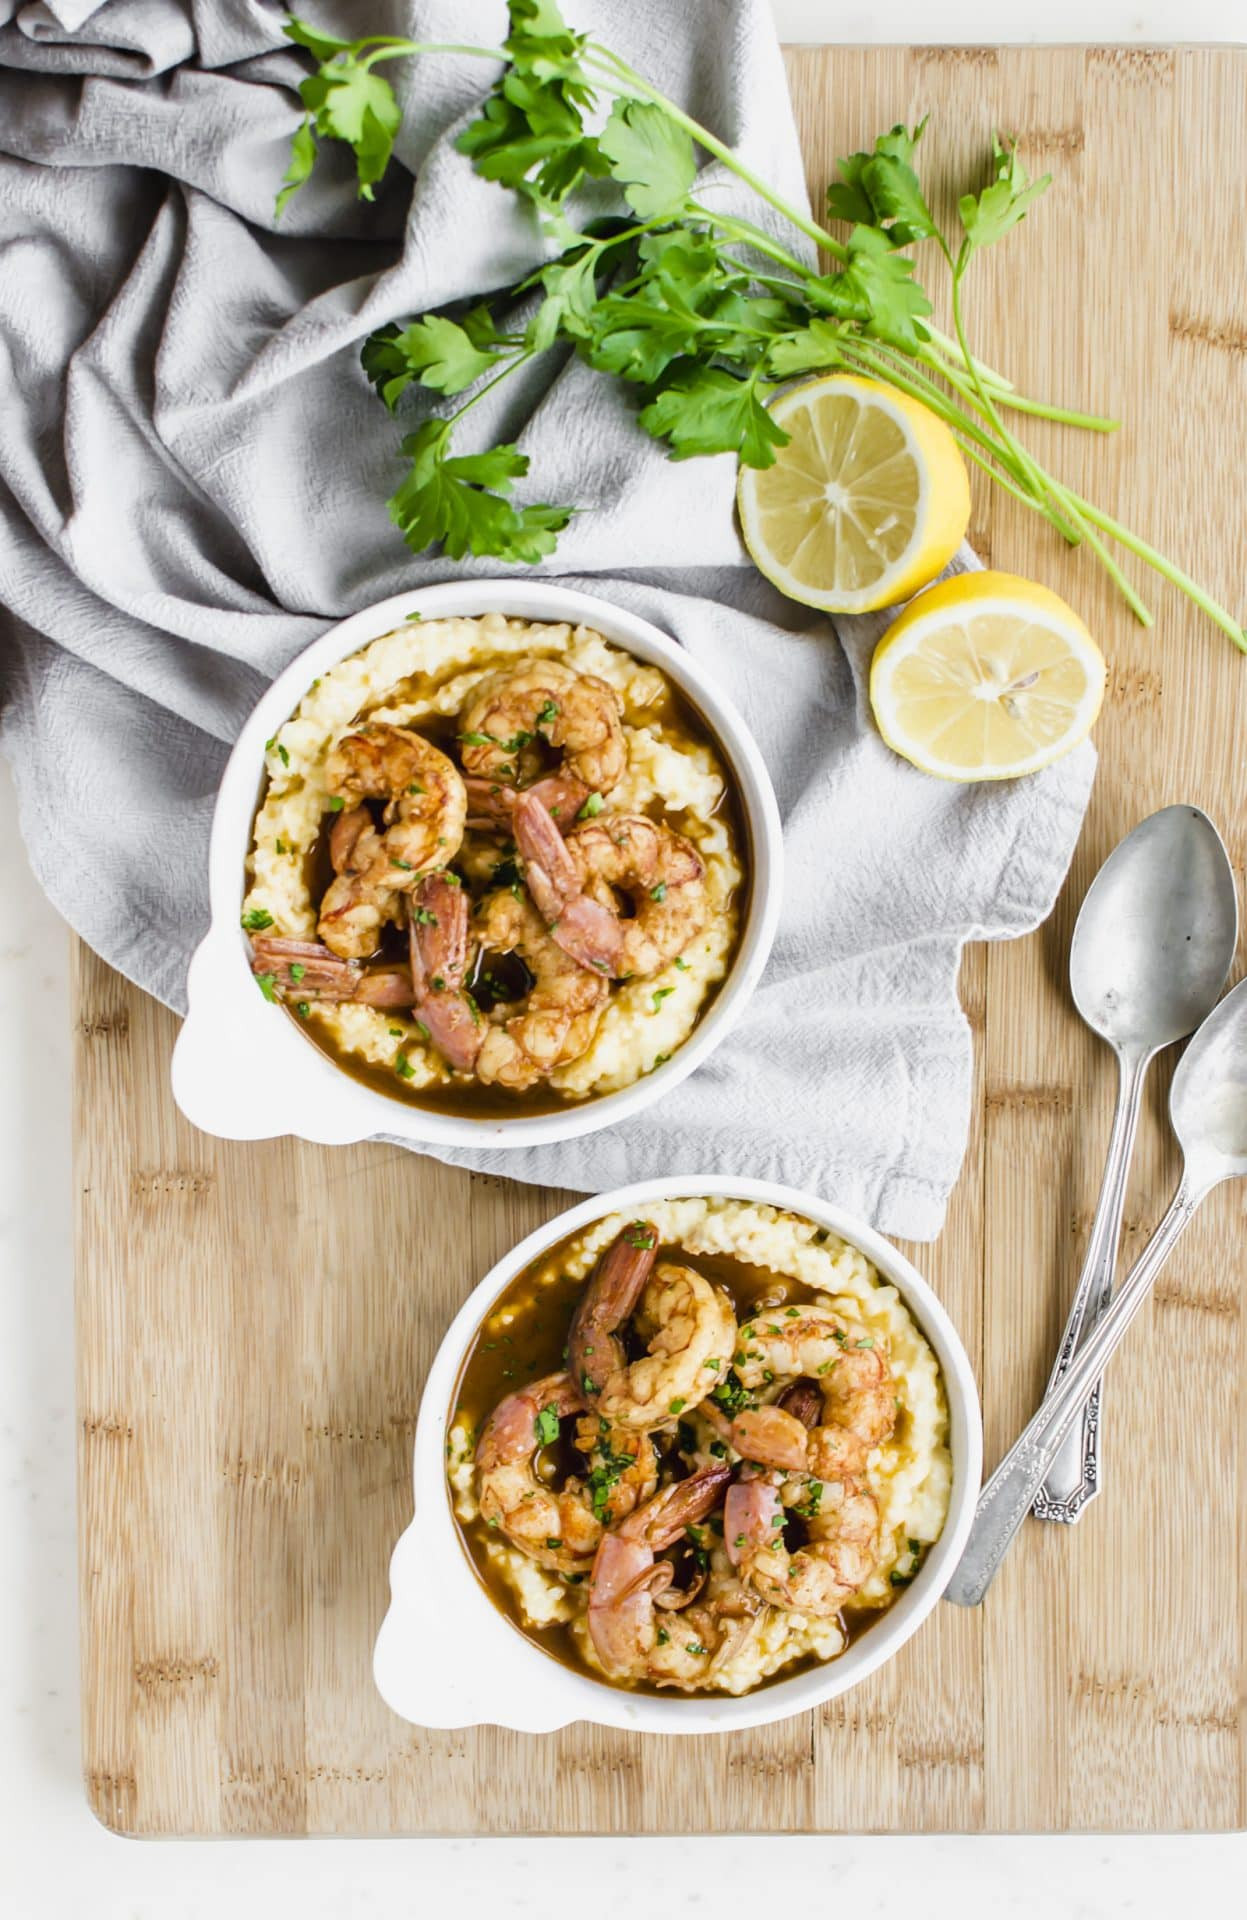 New Orleans Bbq Shrimp And Grits
 New Orleans Style Barbecue Shrimp with Grits